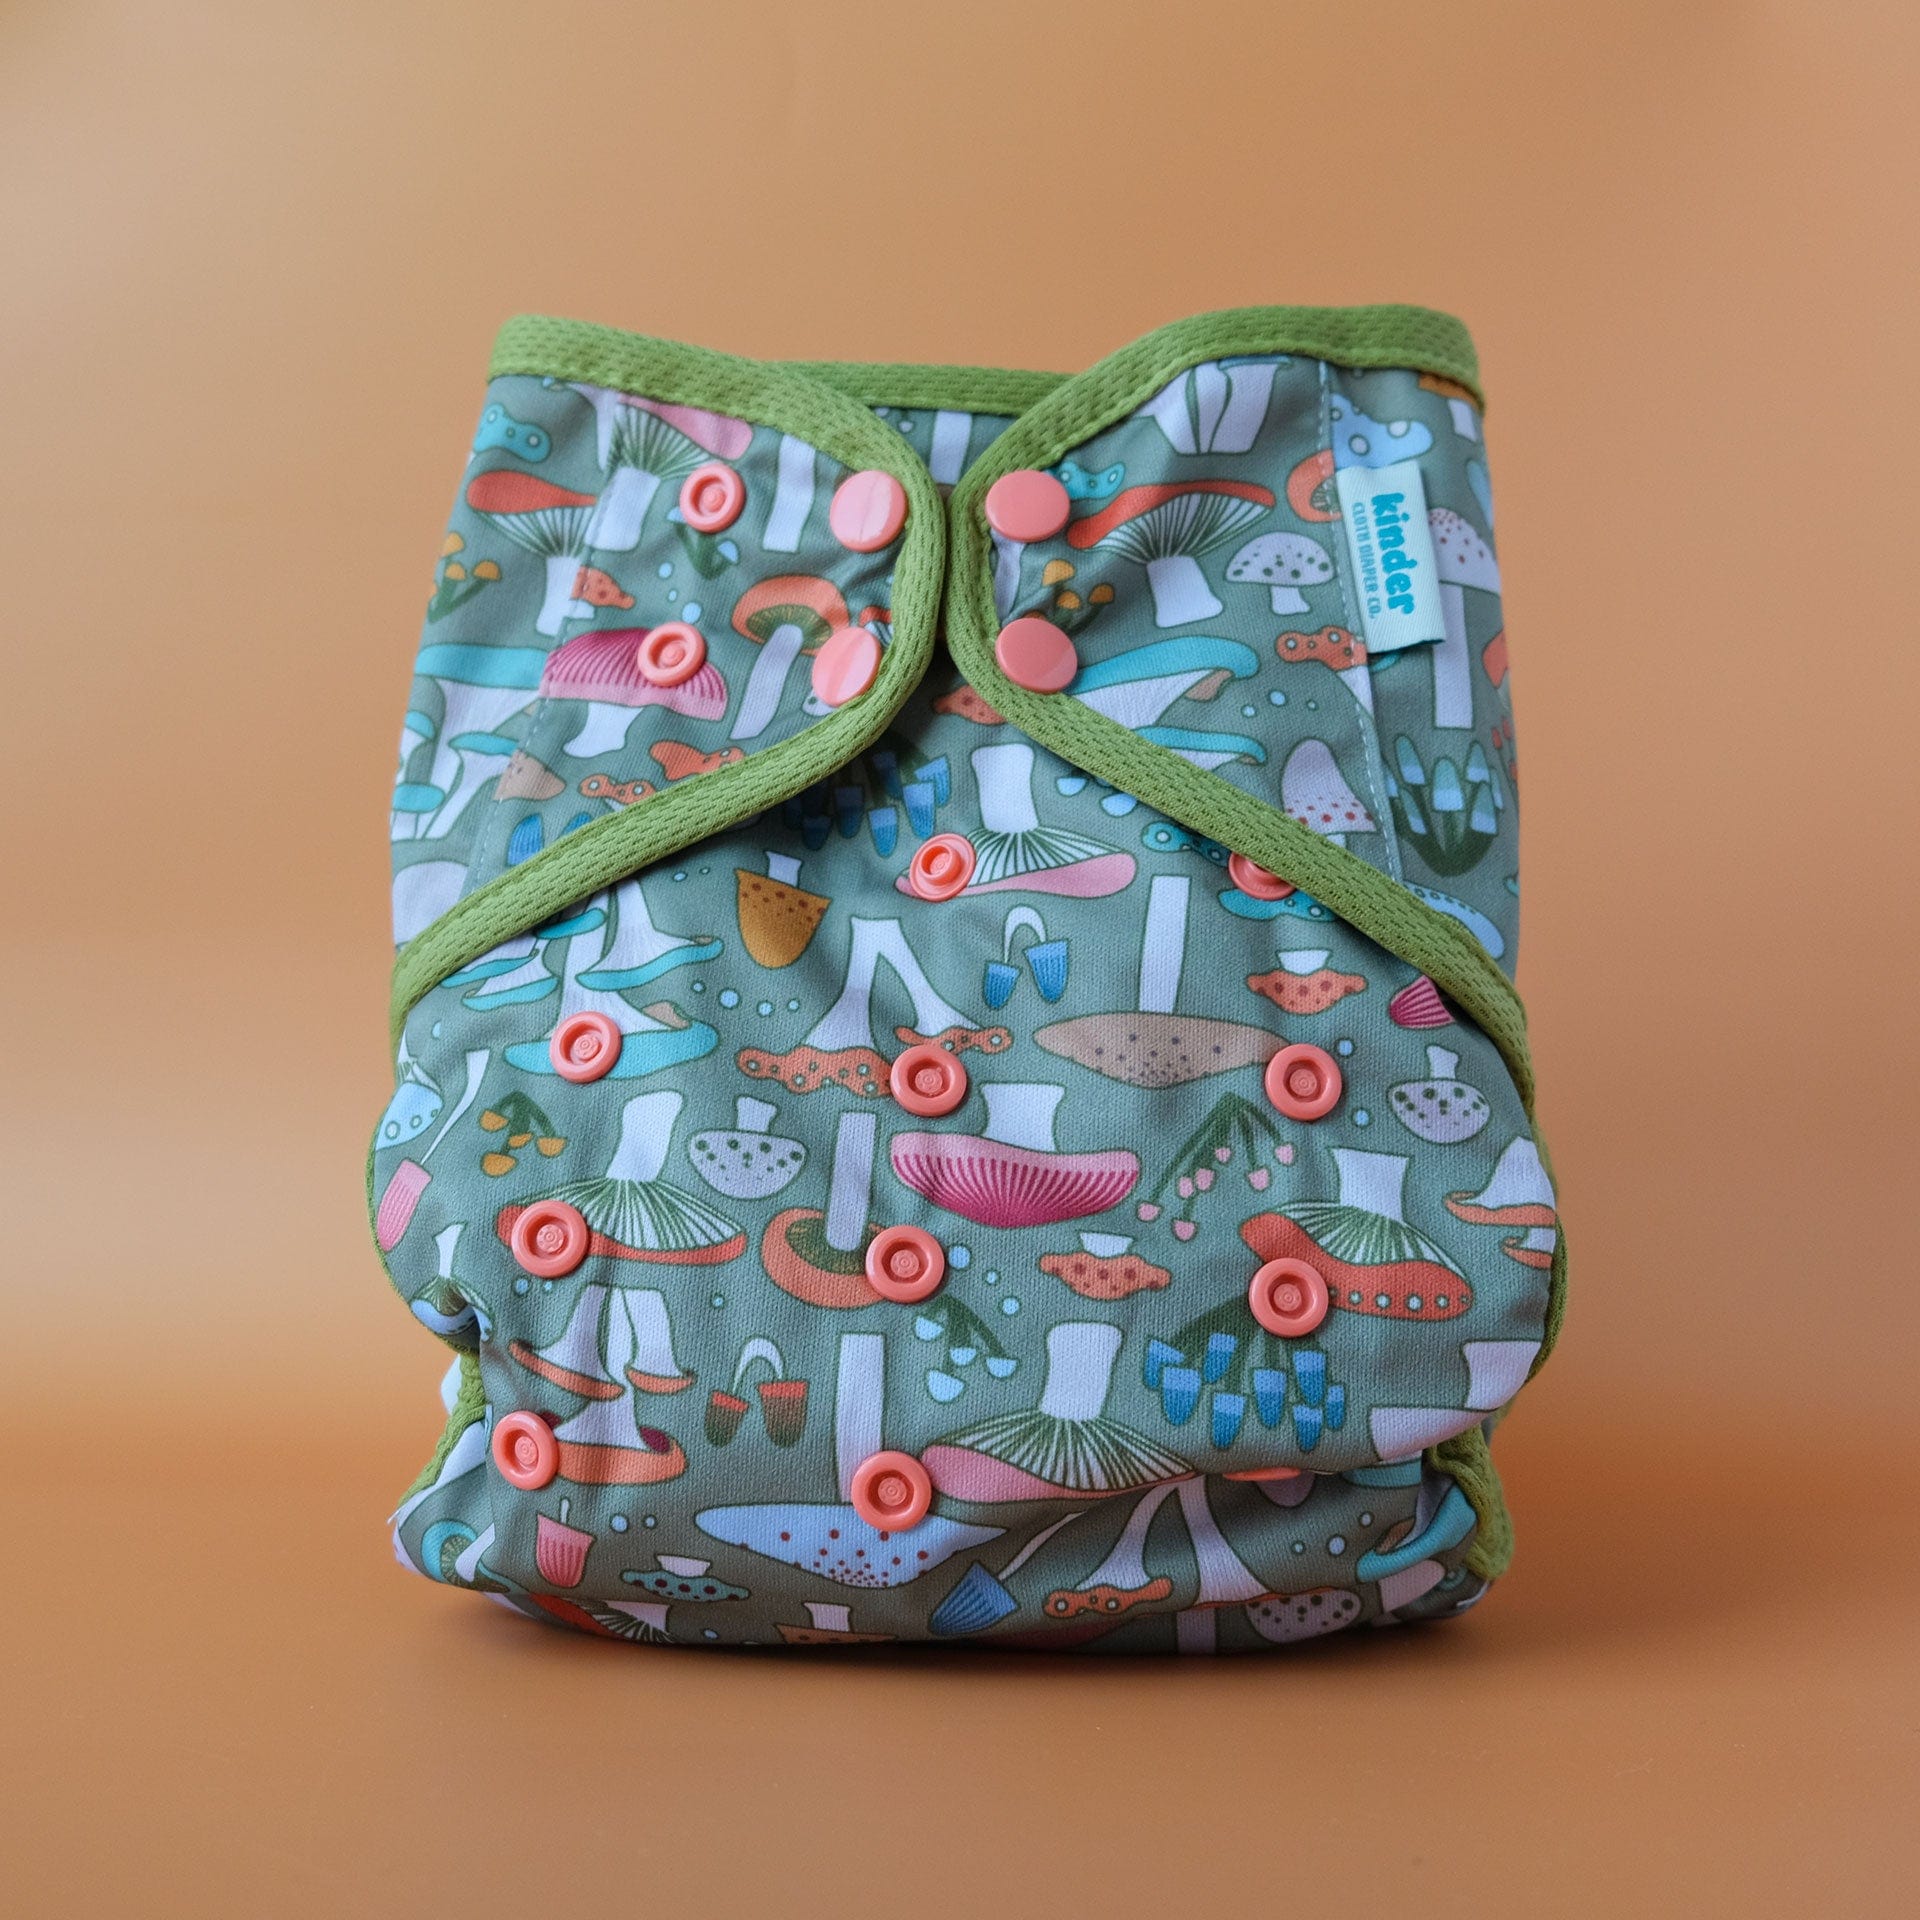 Kinder Cloth Diaper Cover with Bamboo Insert